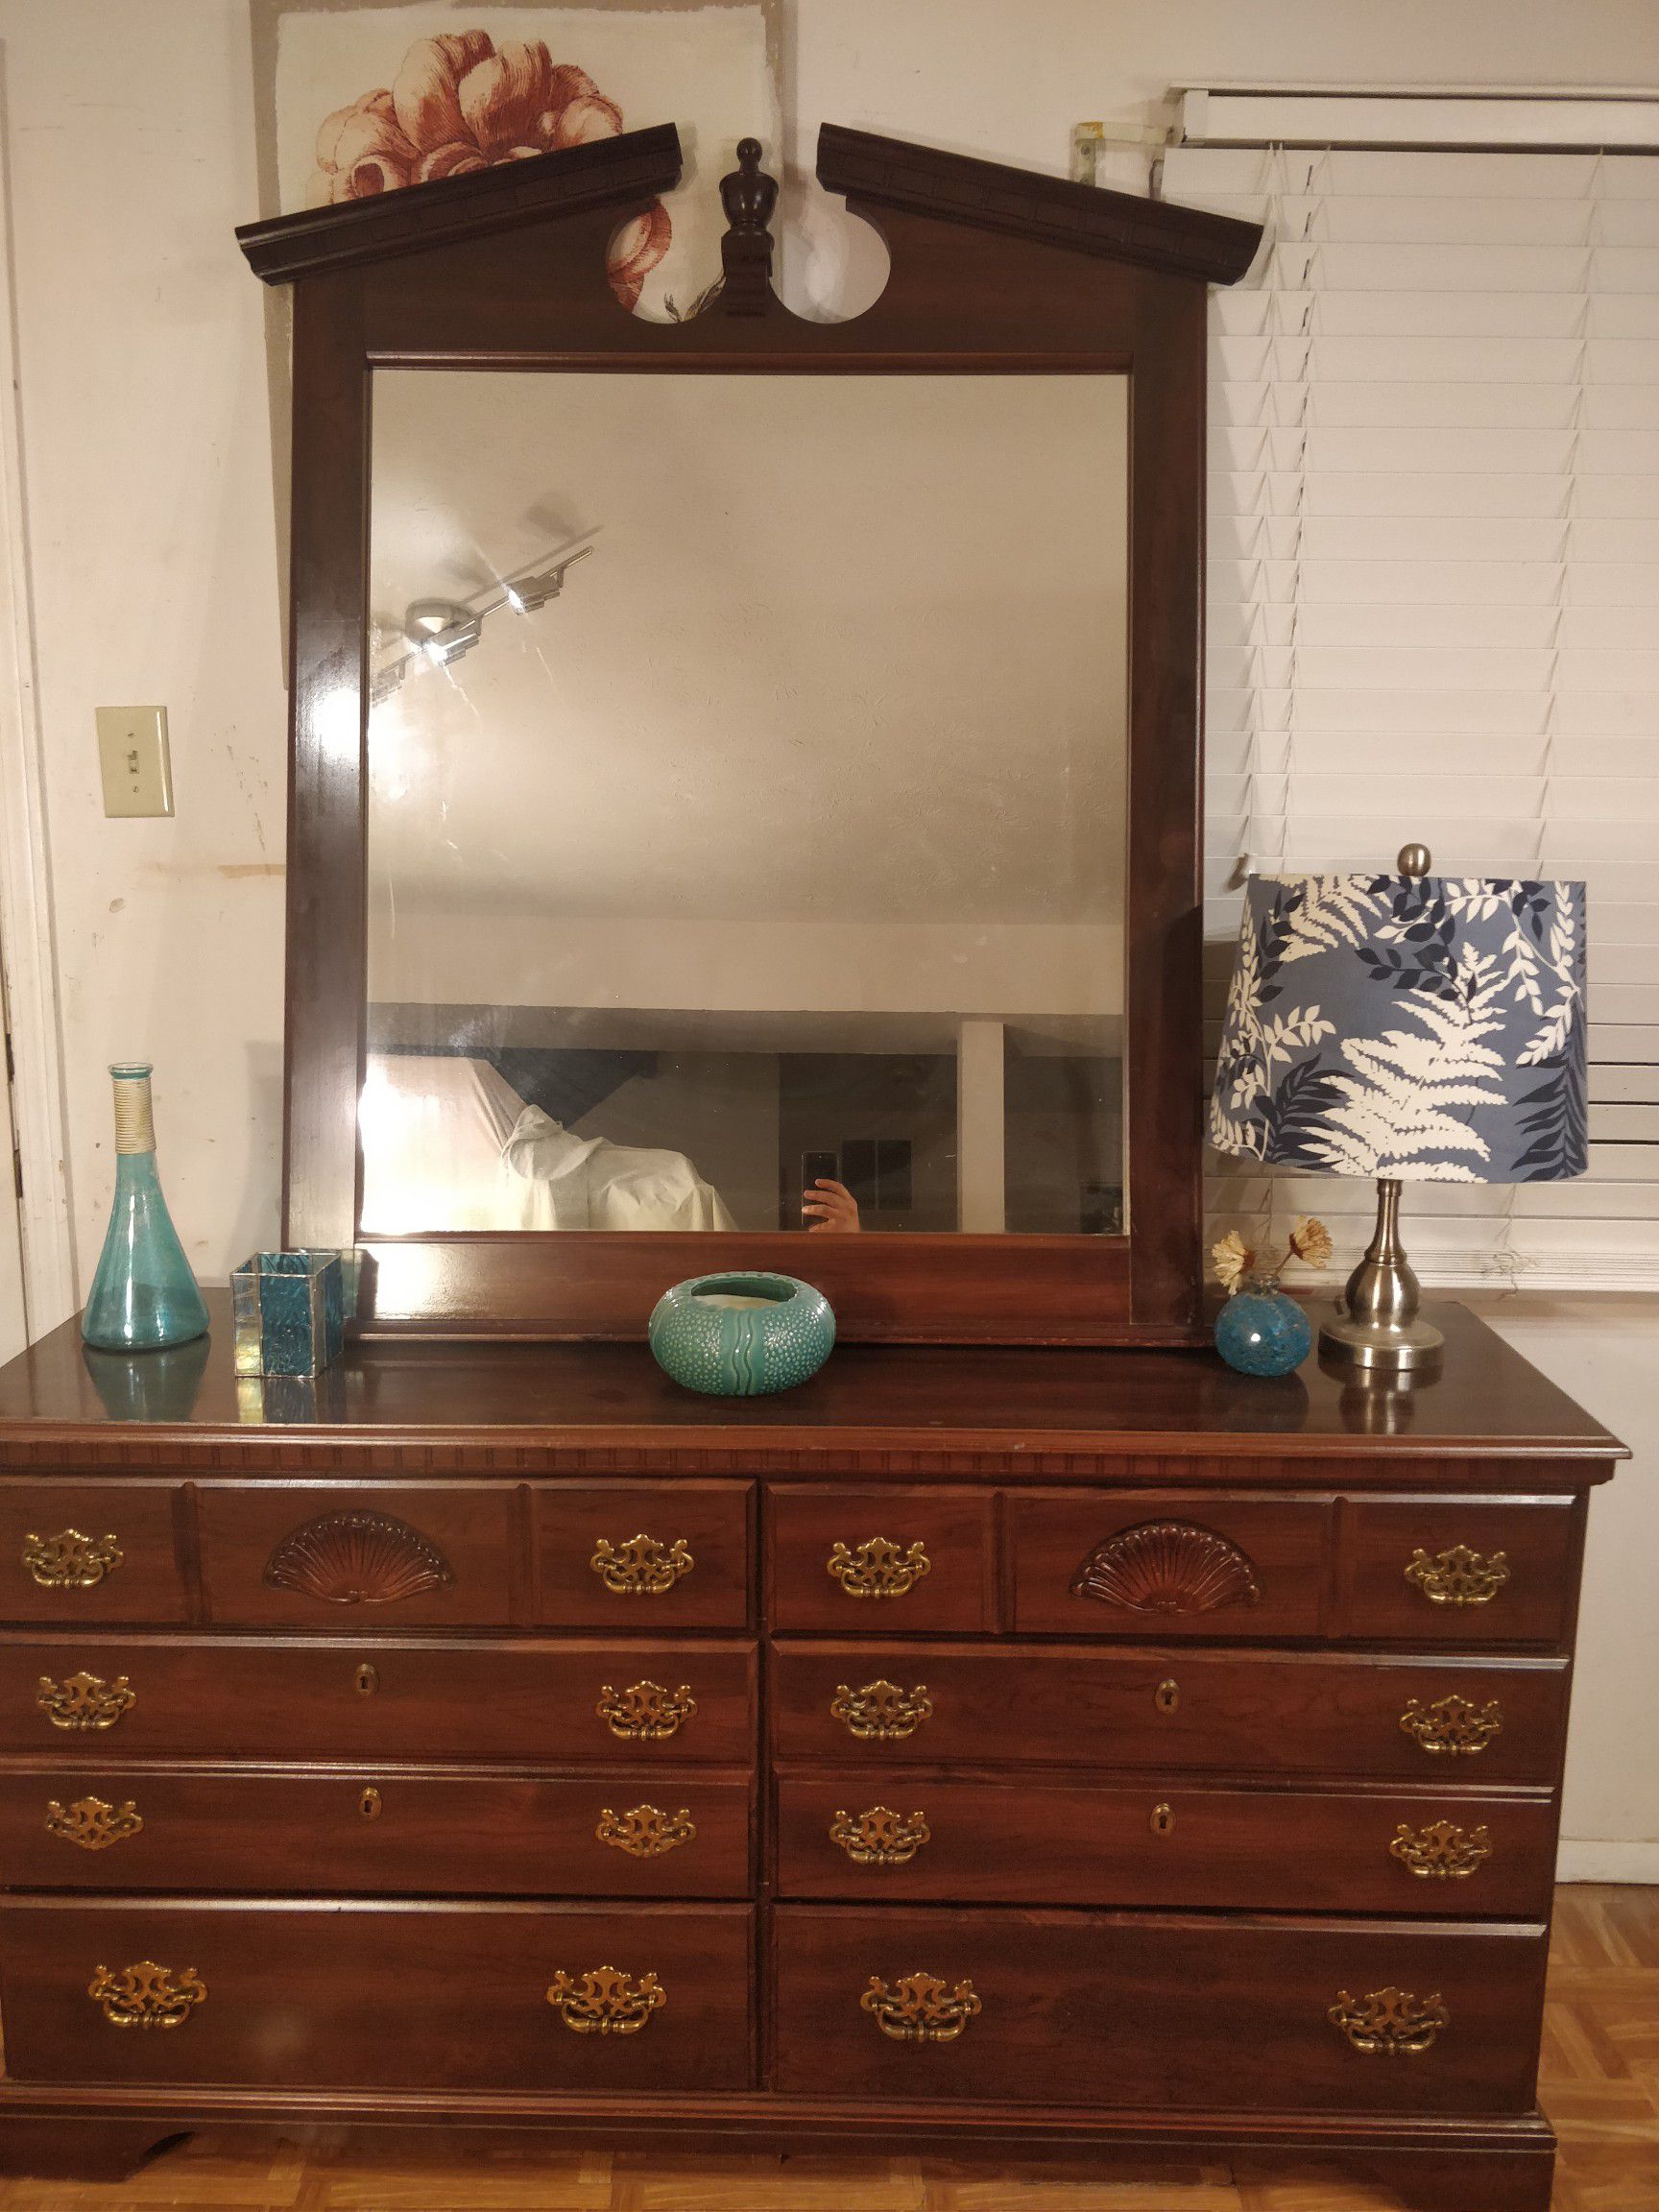 Nice dresser with big mirror in good condition, all drawers working well. L60"*W17"*H31"